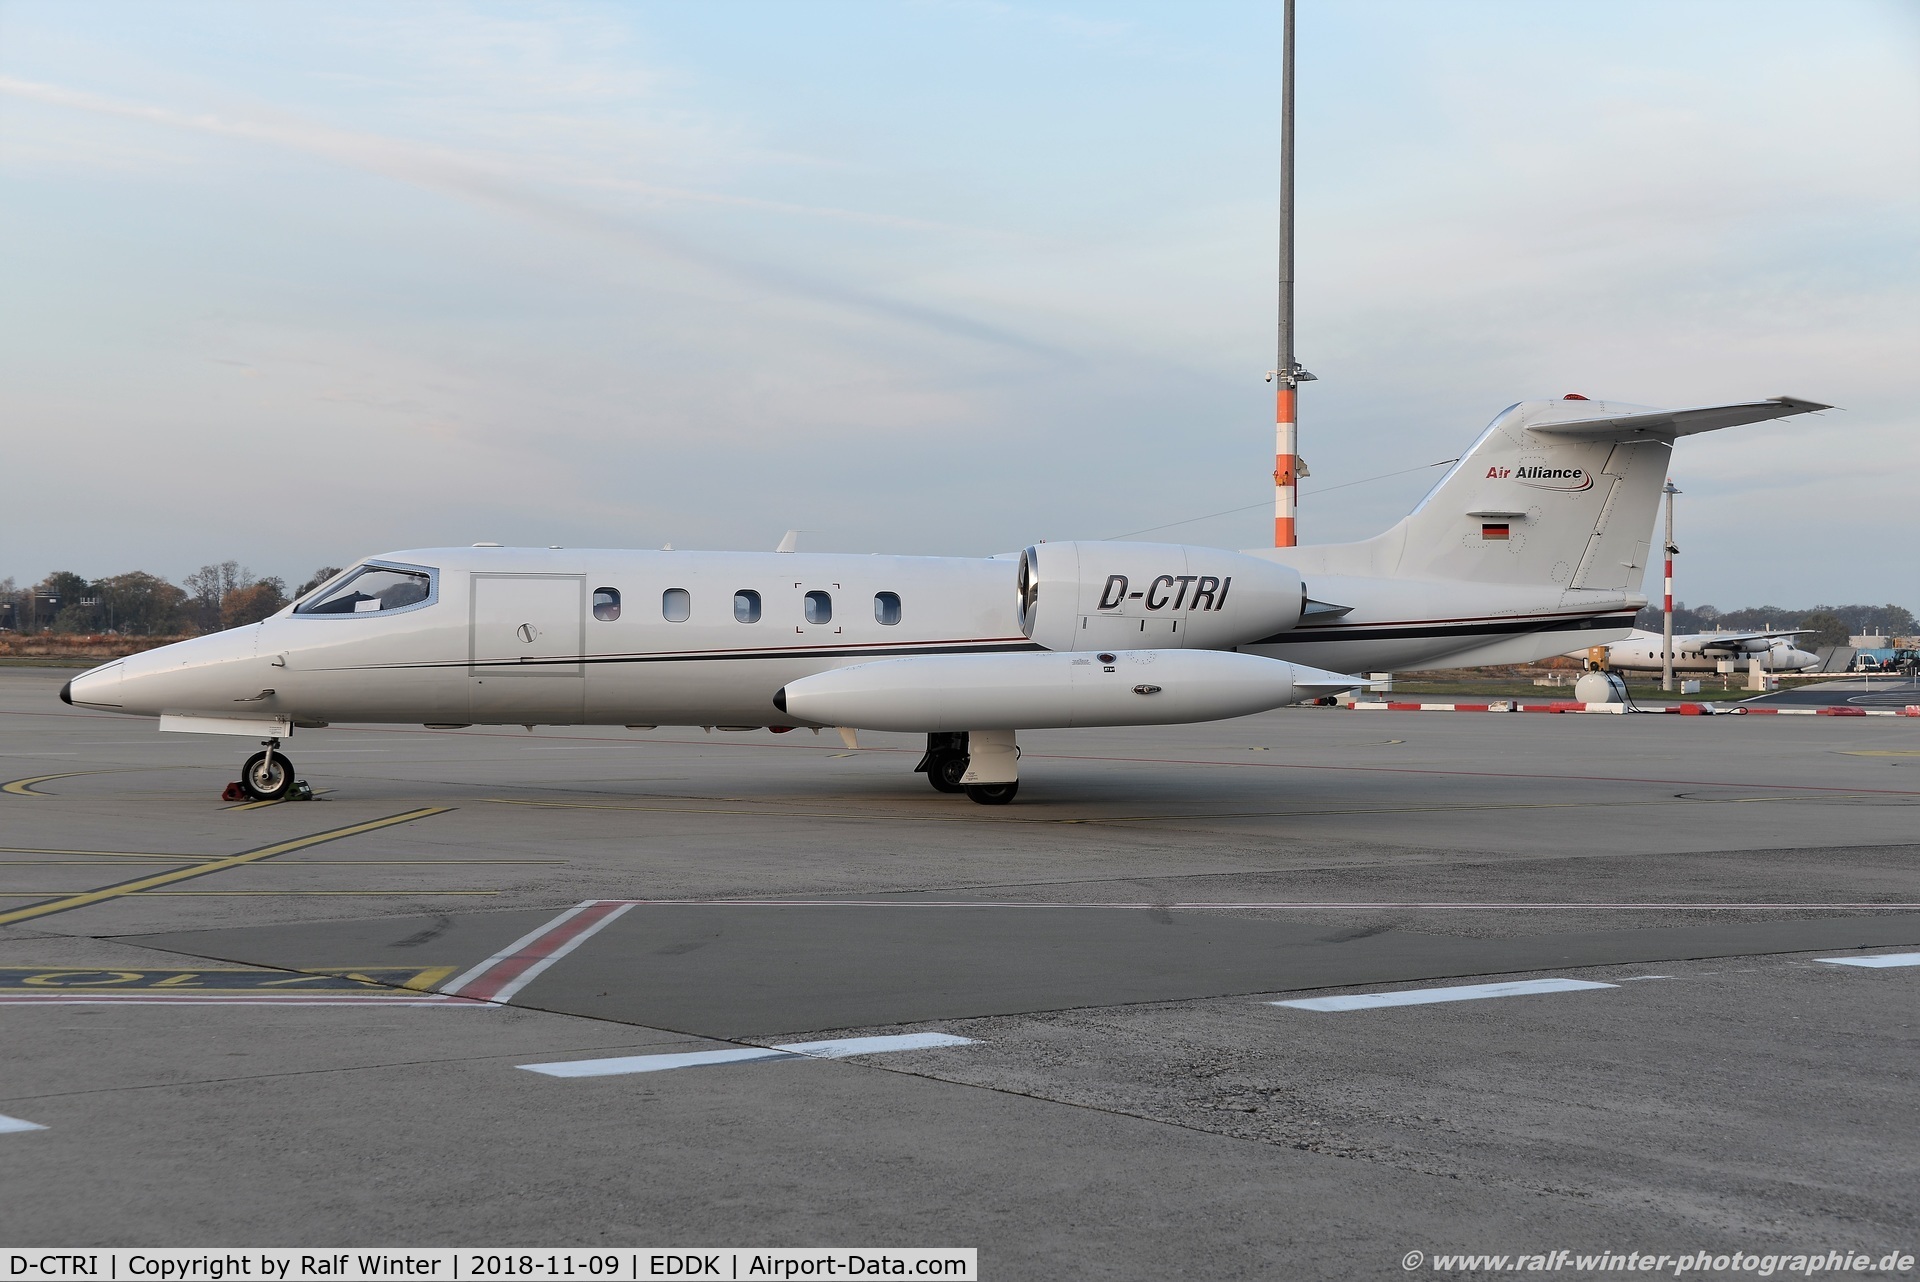 D-CTRI, 1980 Learjet 35A C/N 35A-346, Learjet 35A - AYY Air Alliance - 35-346 - D-CTRI - 09.11.2018 - CGN